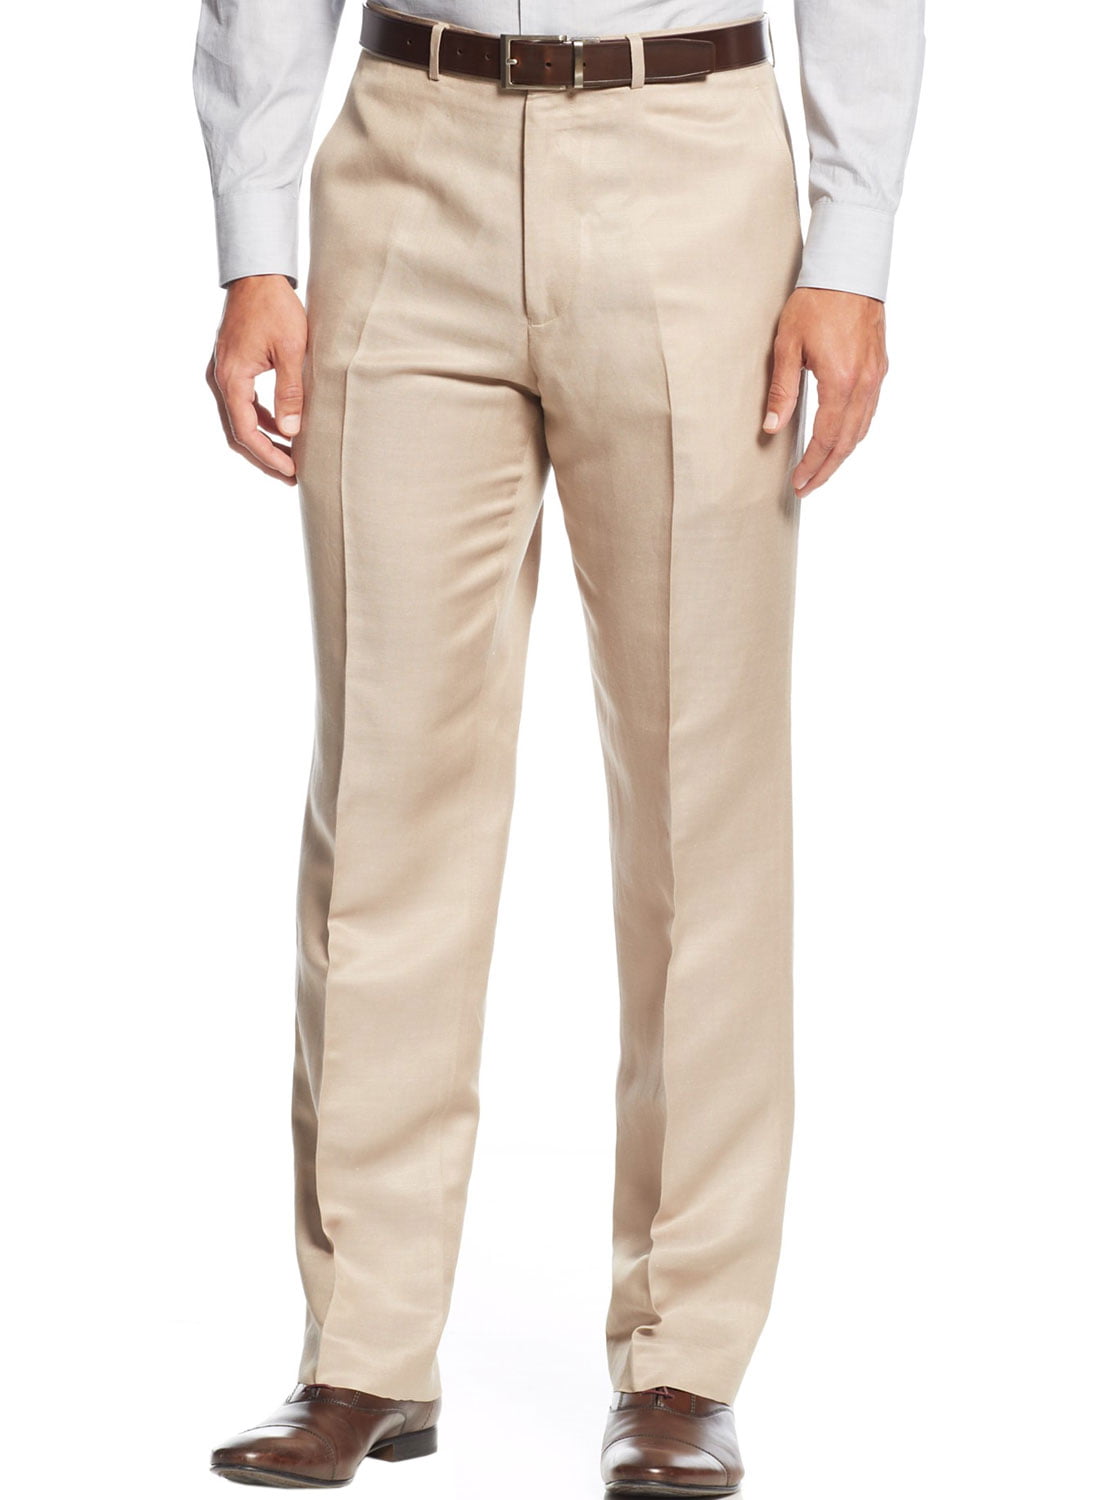 Kenneth Cole - KENNETH COLE New York Dress Pants 38 x 30 Tan Slim Fit ...